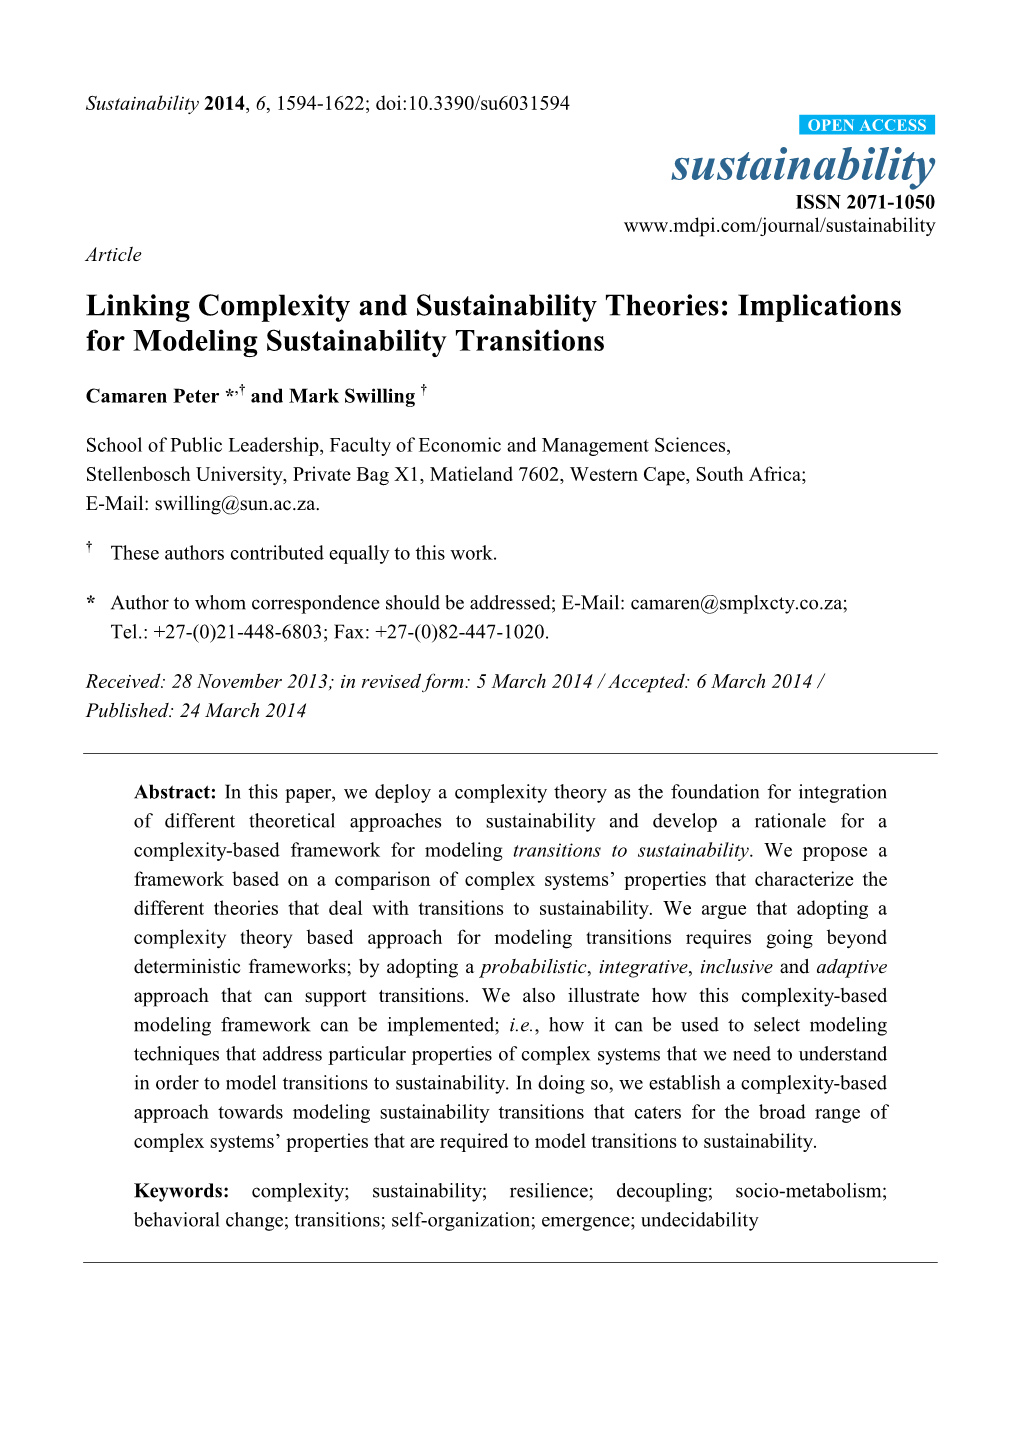 Linking Complexity and Sustainability Theories: Implications for Modeling Sustainability Transitions